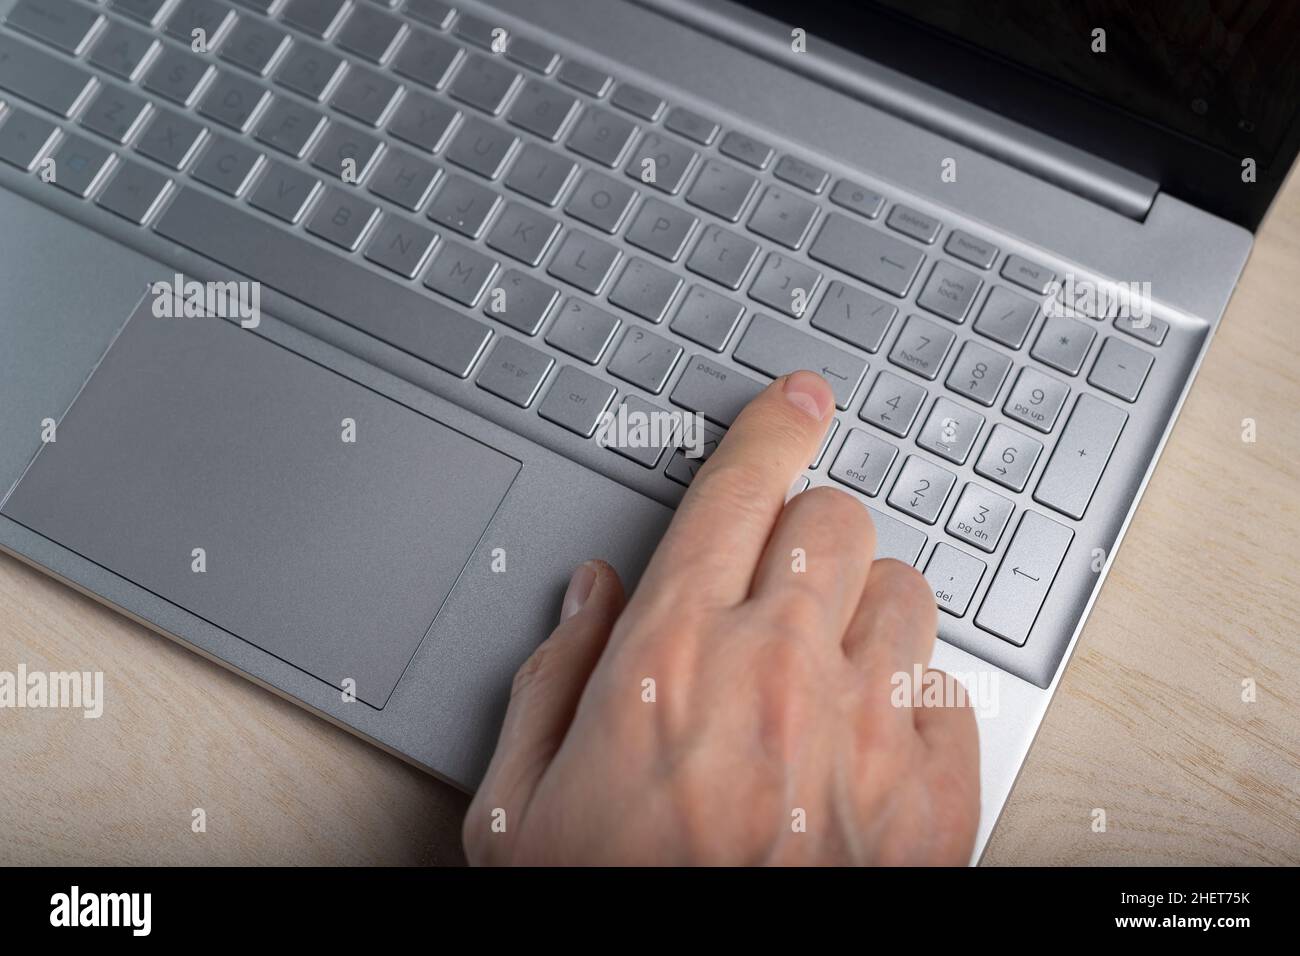 Hand on laptop keyboard, tapping and pressing button with finger closeup. Stock Photo